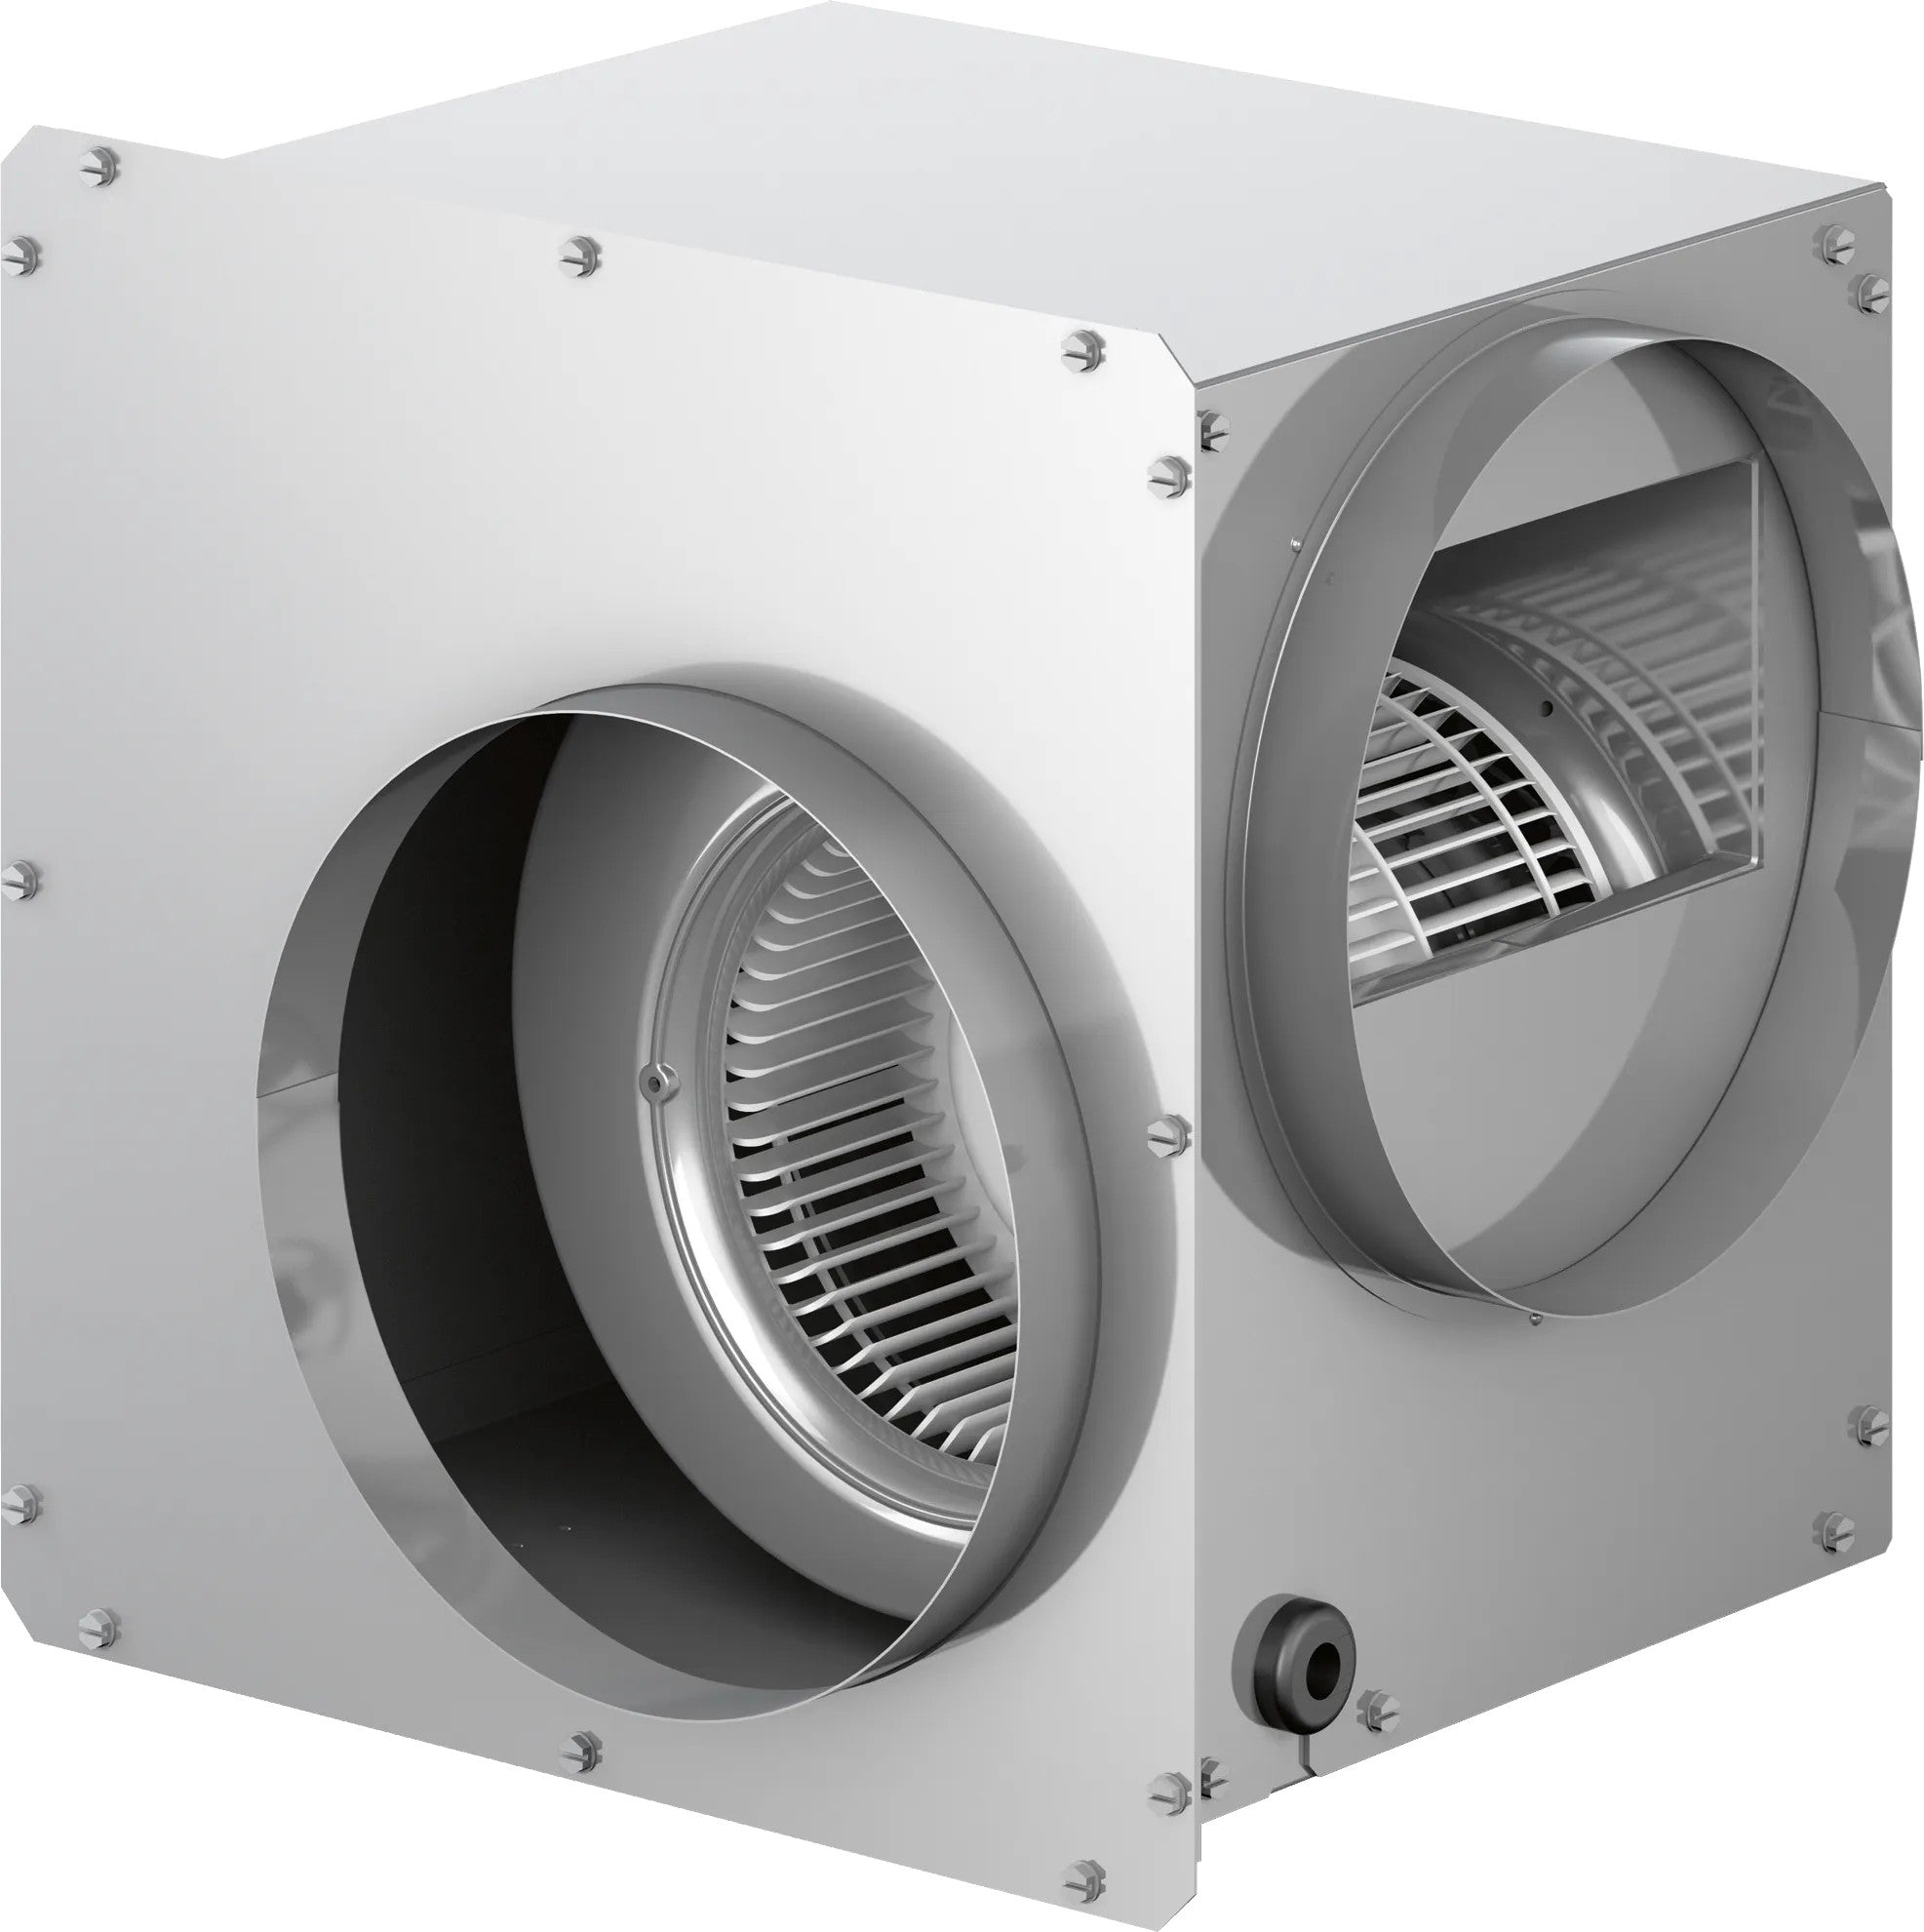 Thermador - 14.4 Inch 600 CFM Blower Vent in Stainless - VTD600P